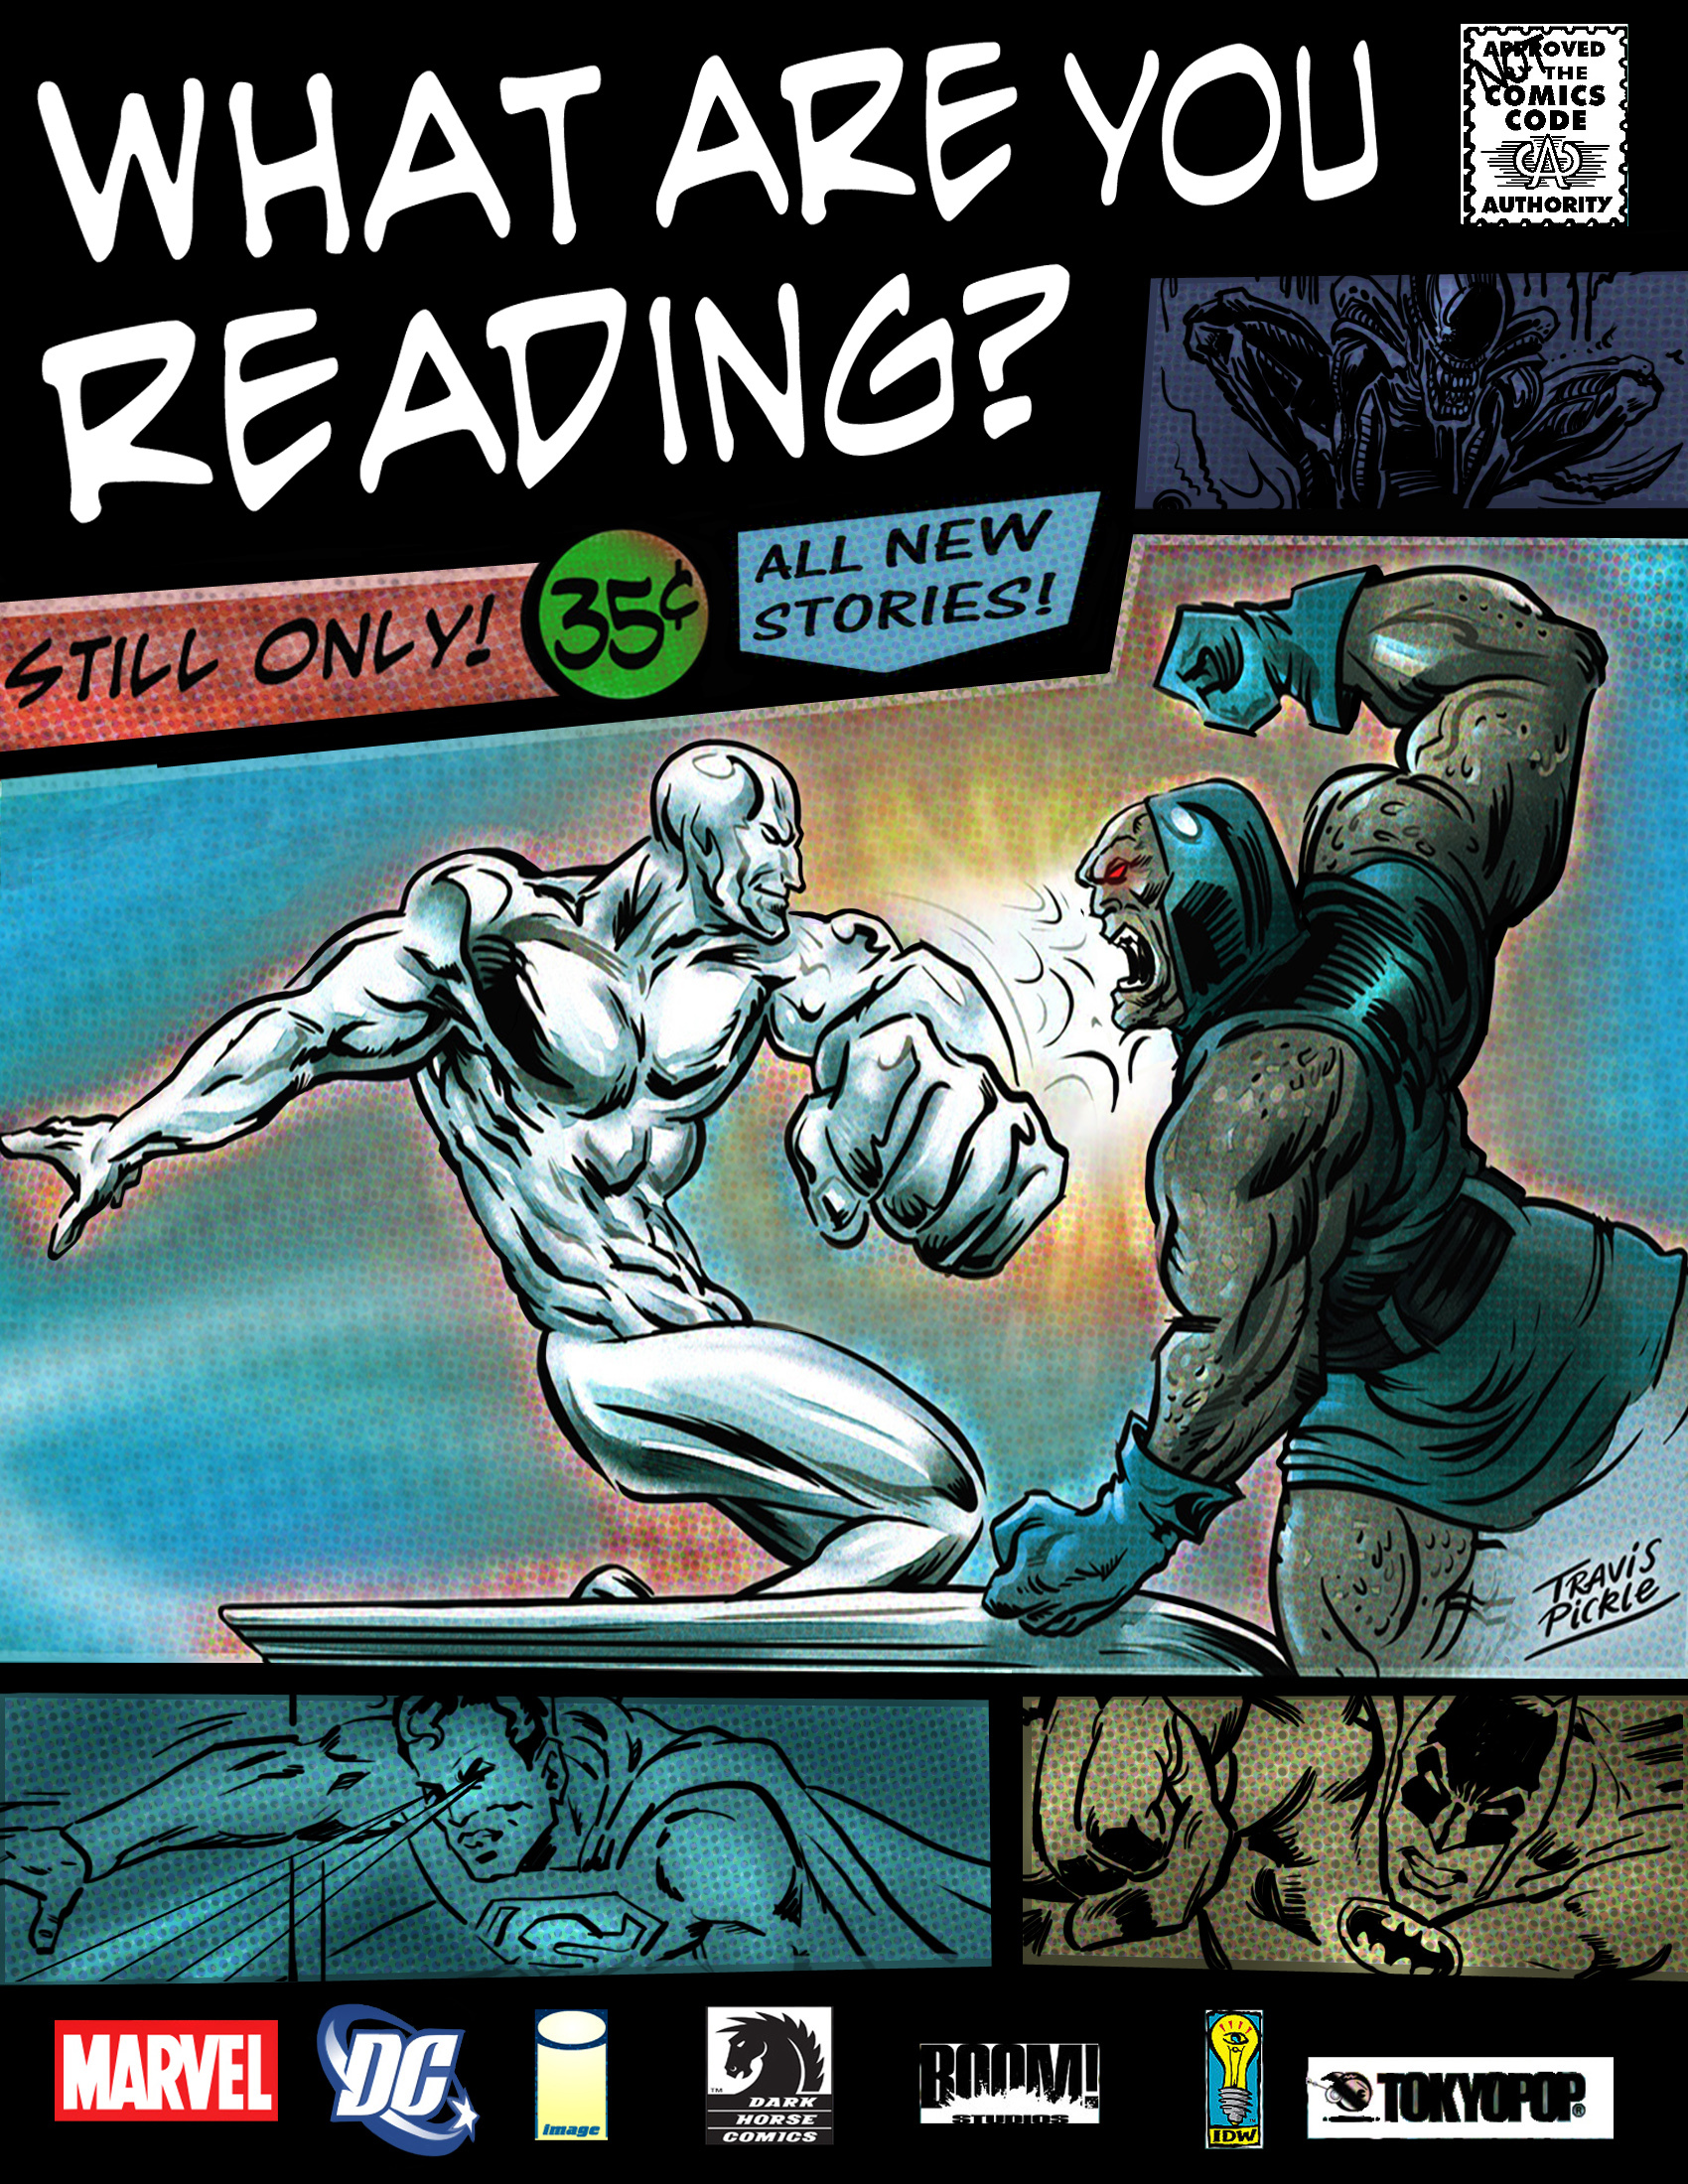 What Are You Reading? Volume 8 Issue 13